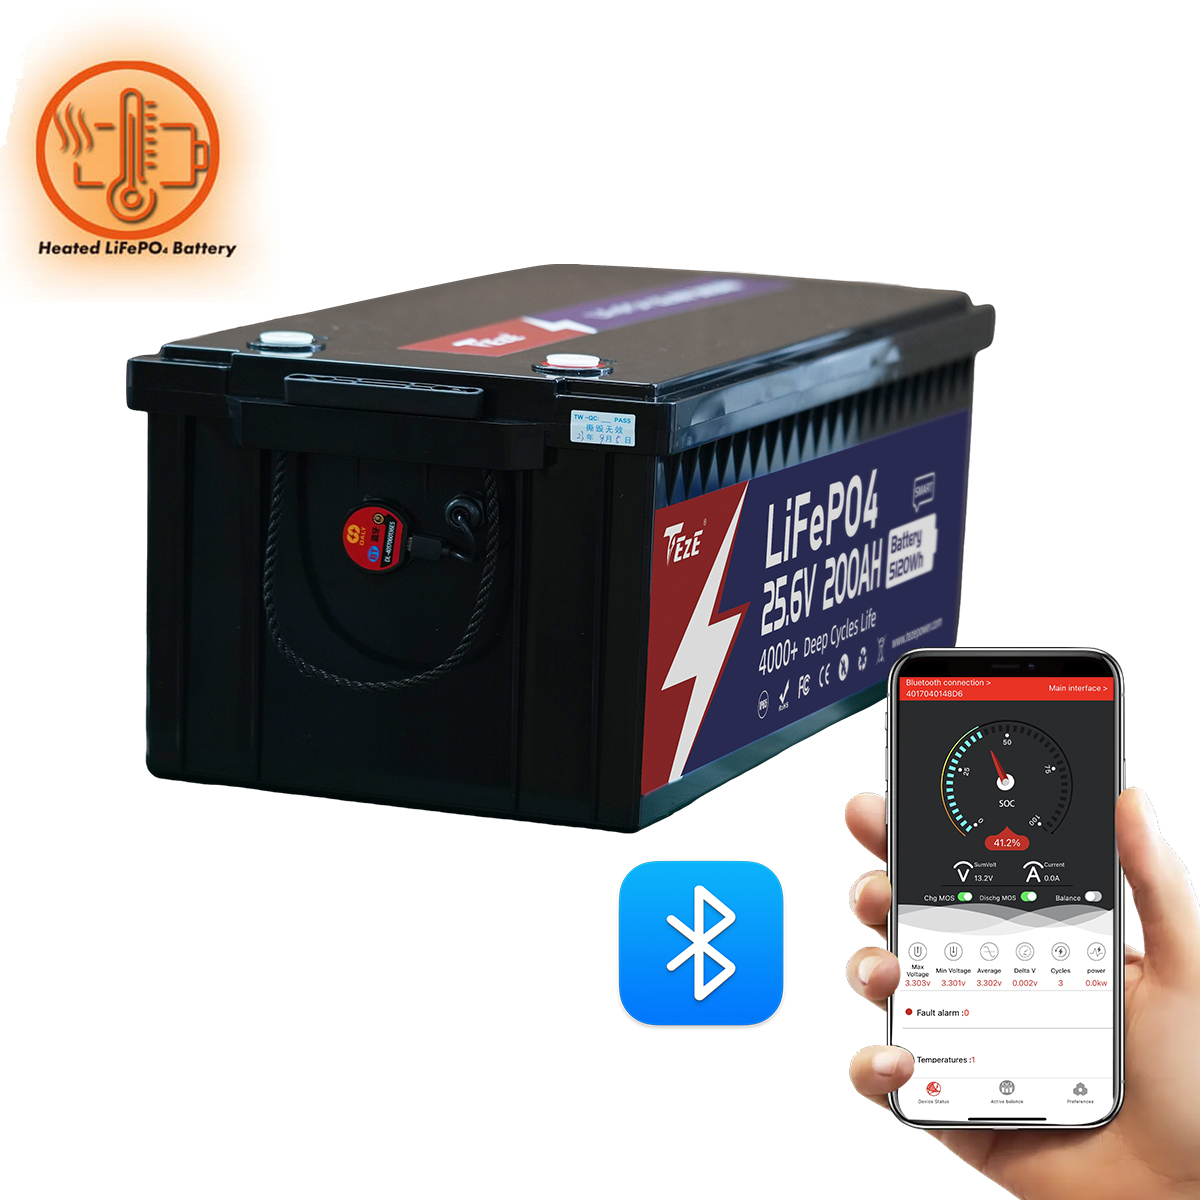 NEW-TezePower 24V200Ah LiFePO4 Battery with Bluetooth Built-in 200A Daly BMS